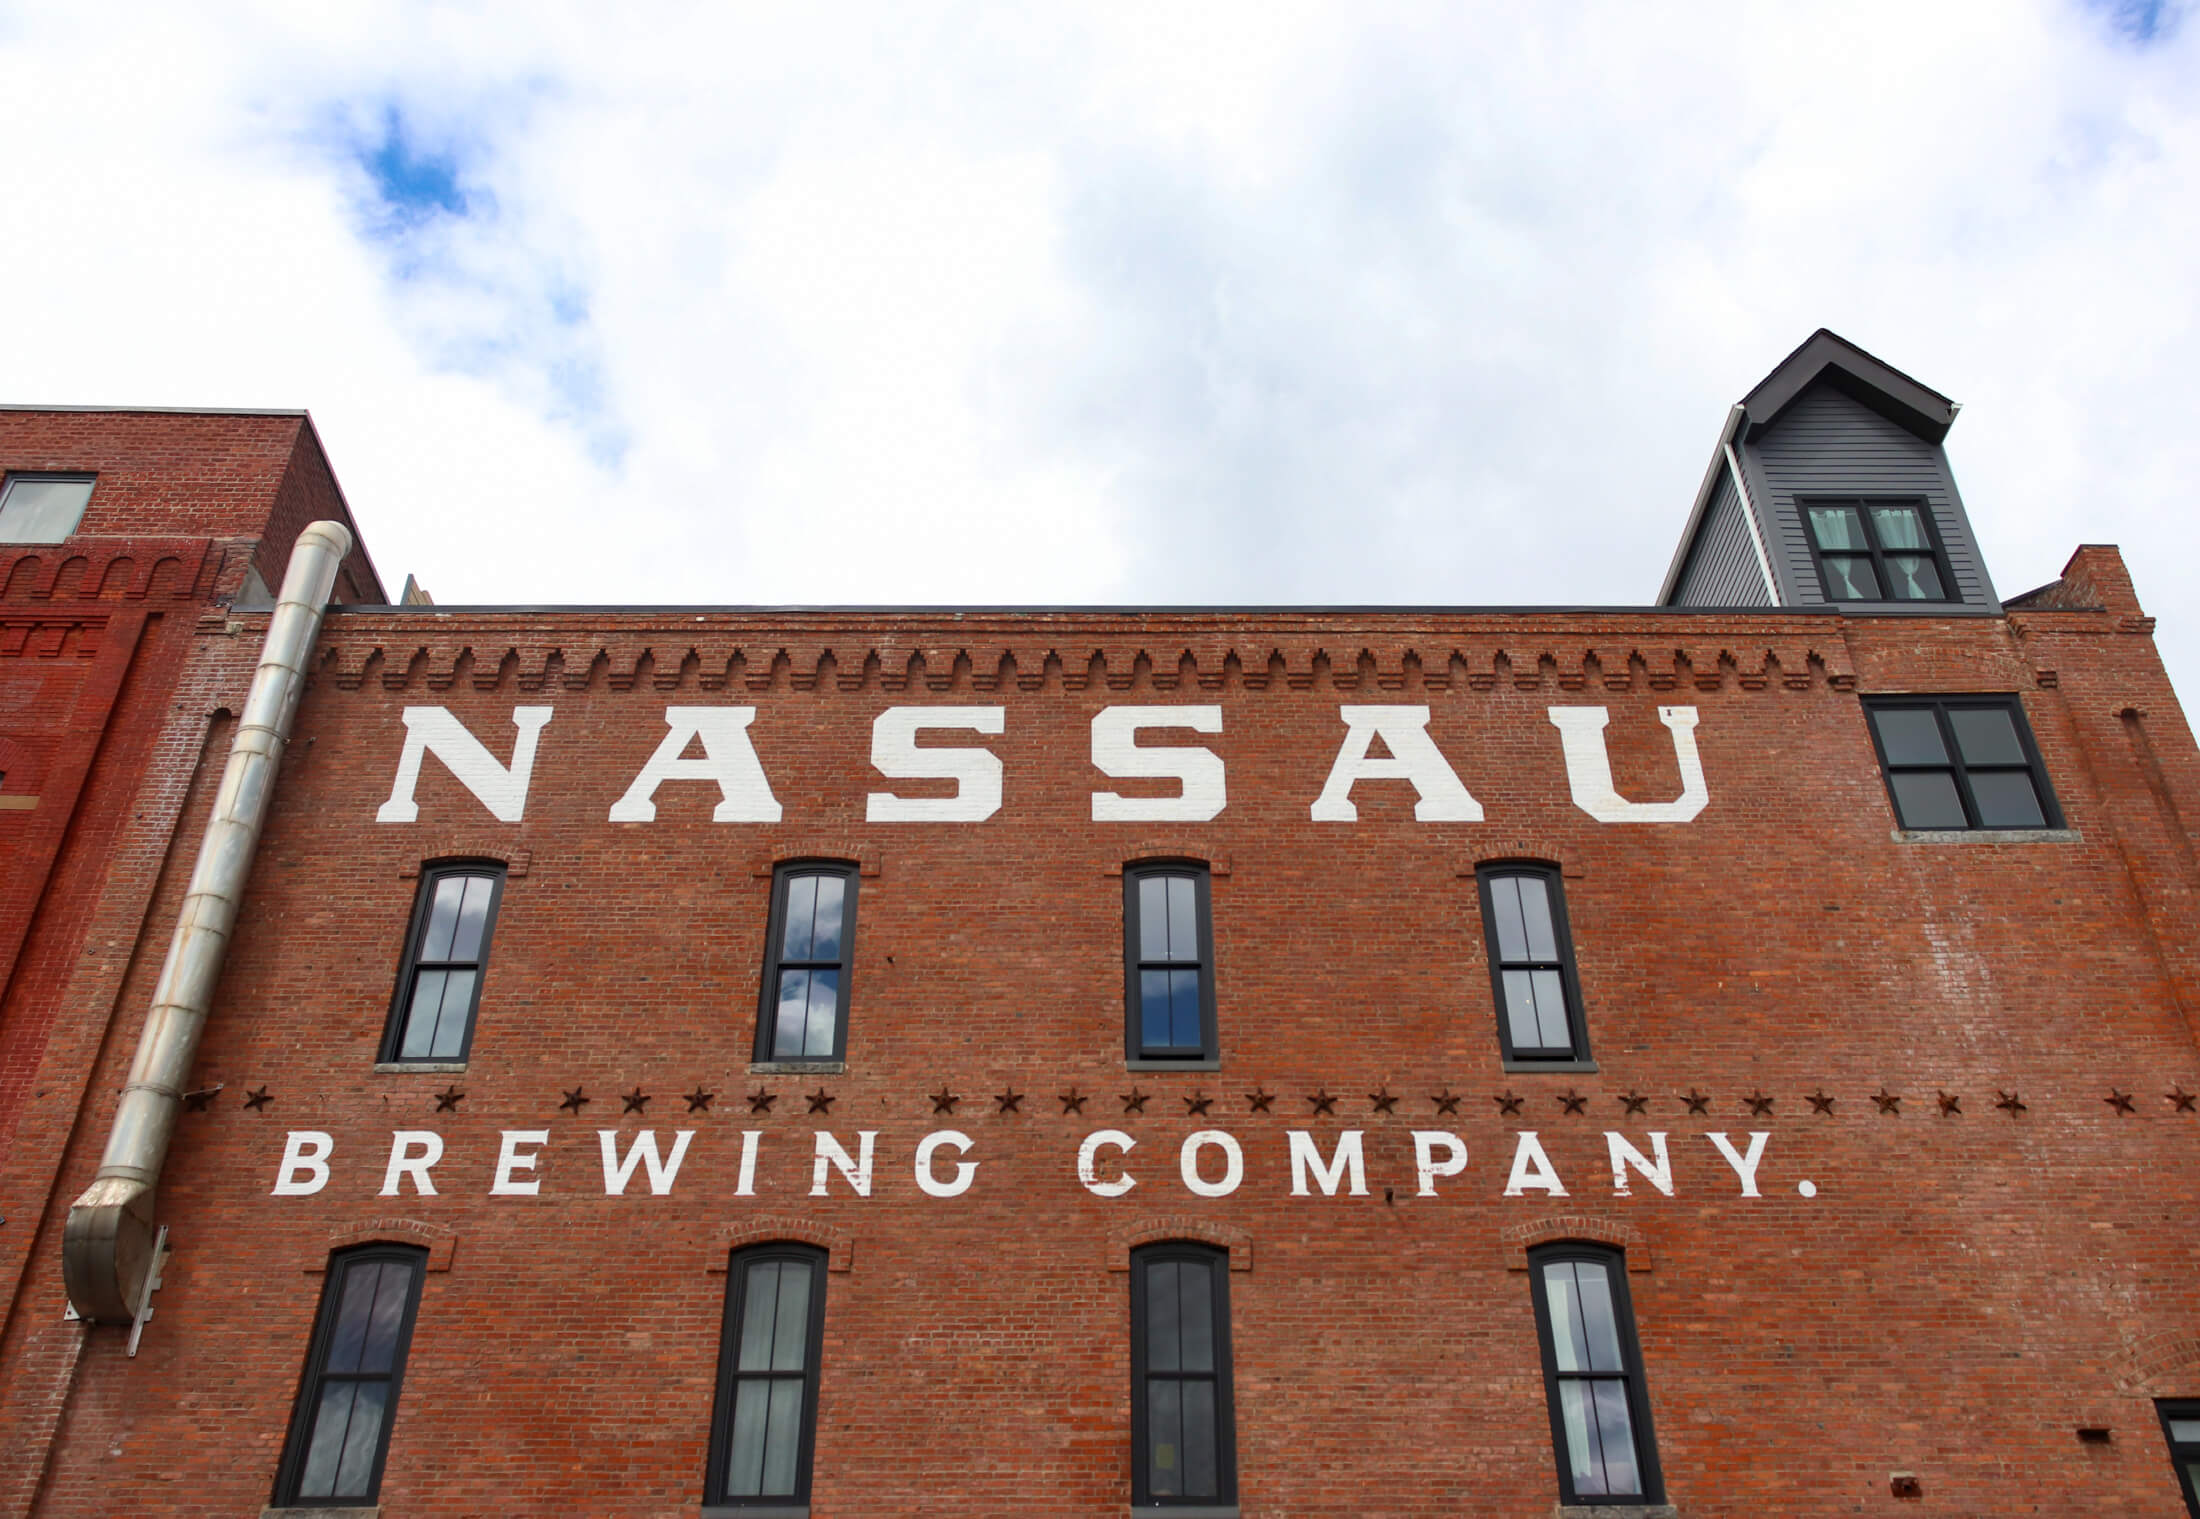 the white painted nassau brewing company sign on the exterior of the building